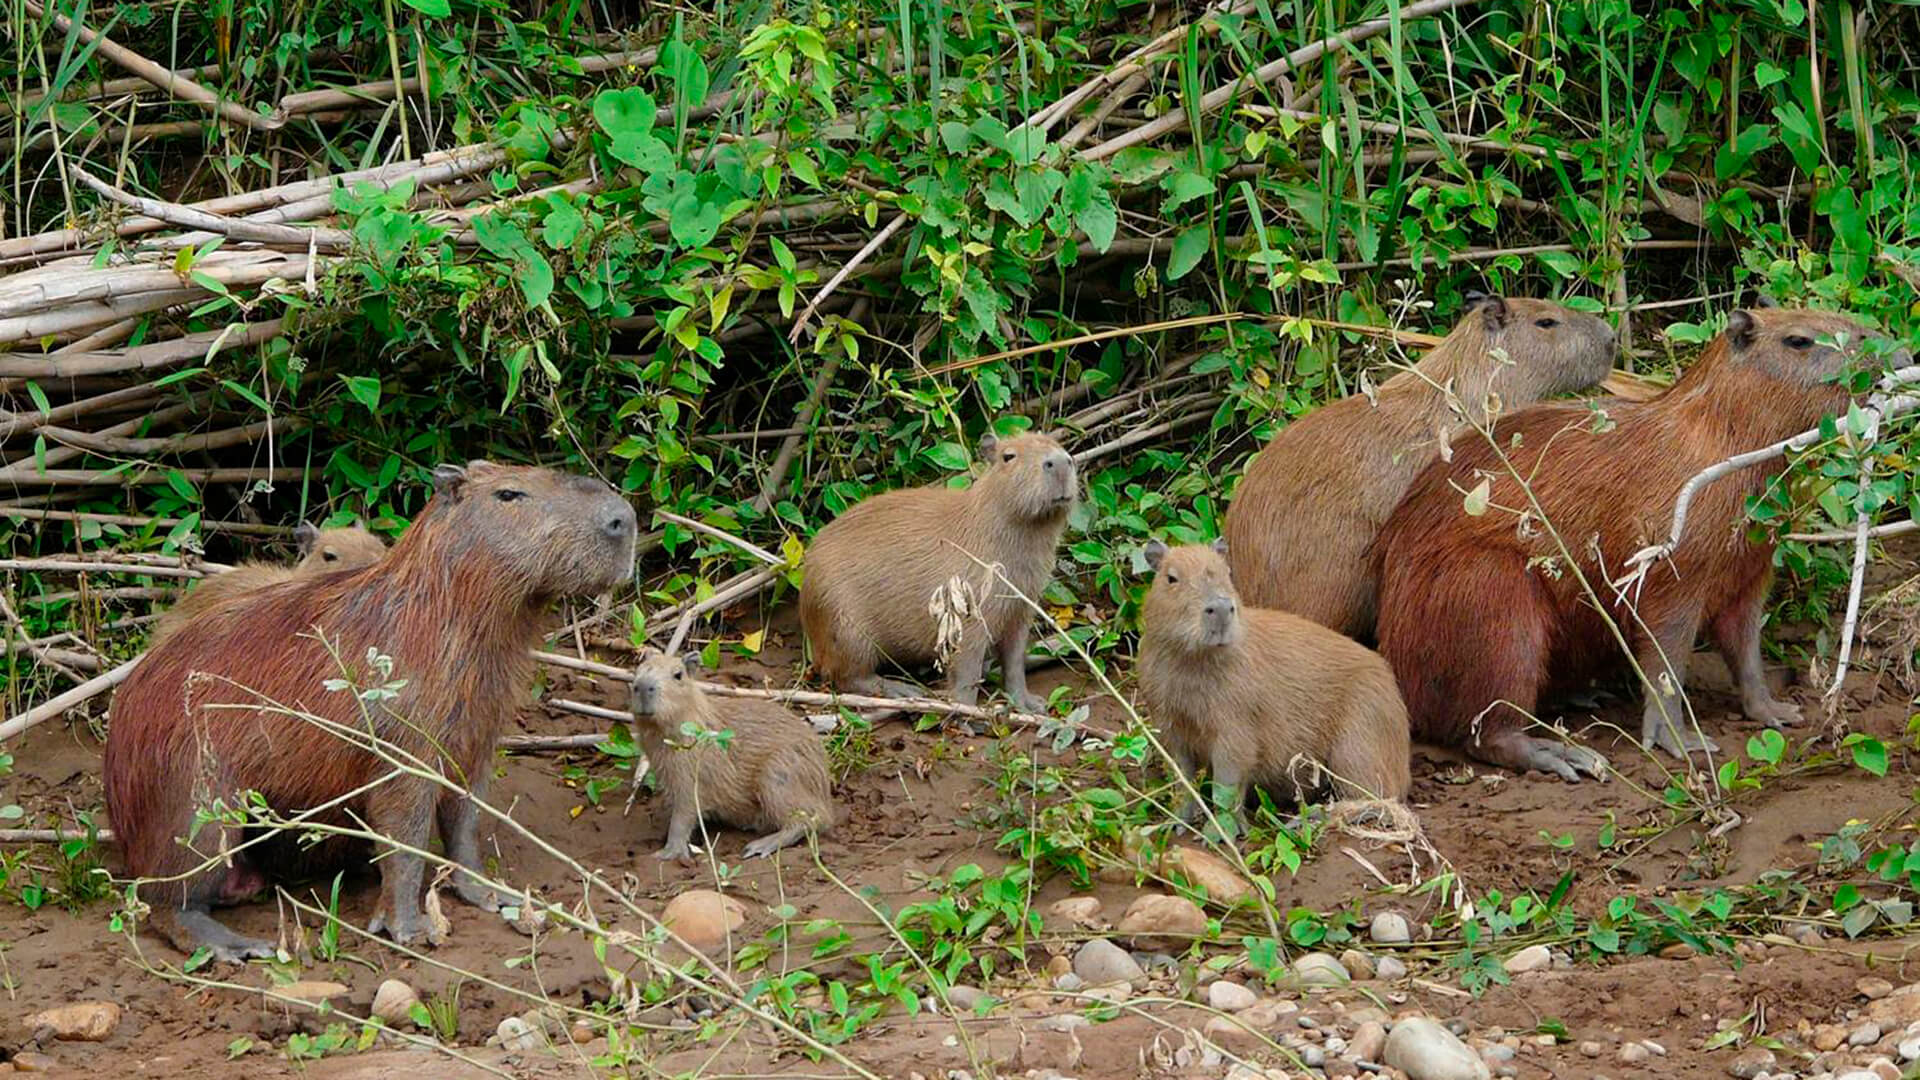 Adult and young capibaras in a river bank